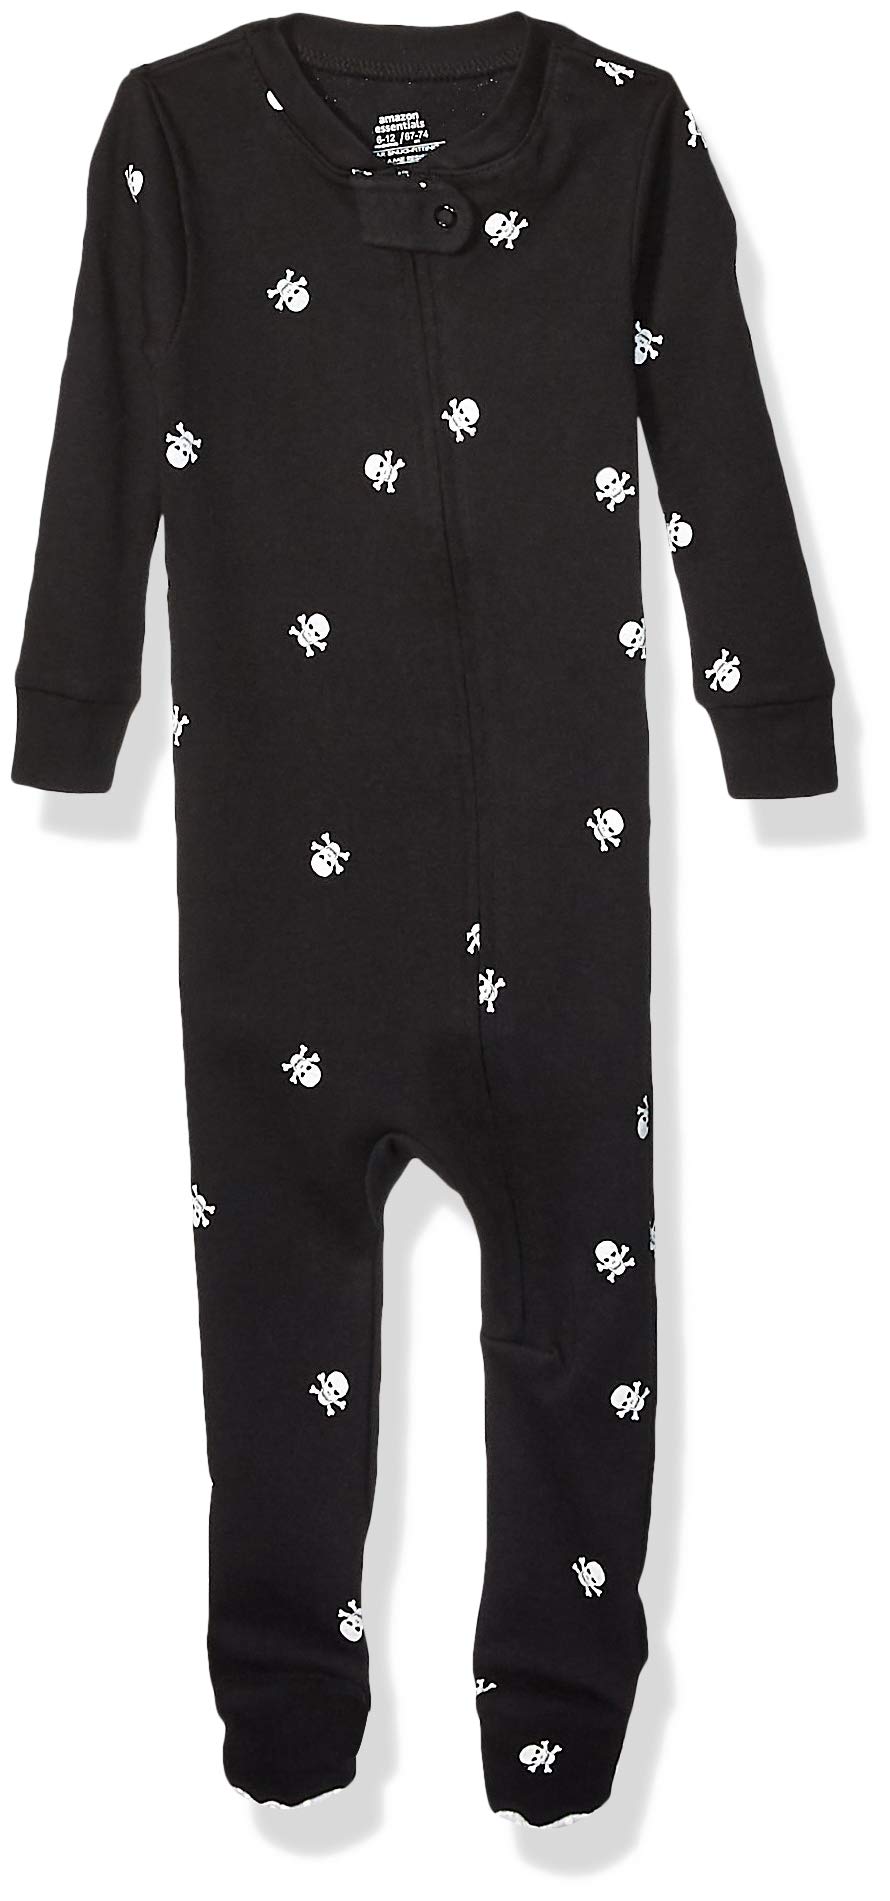 Amazon Essentials Unisex Toddlers and Babies' Snug-Fit Cotton Footed Sleeper Pajamas, Multipacks